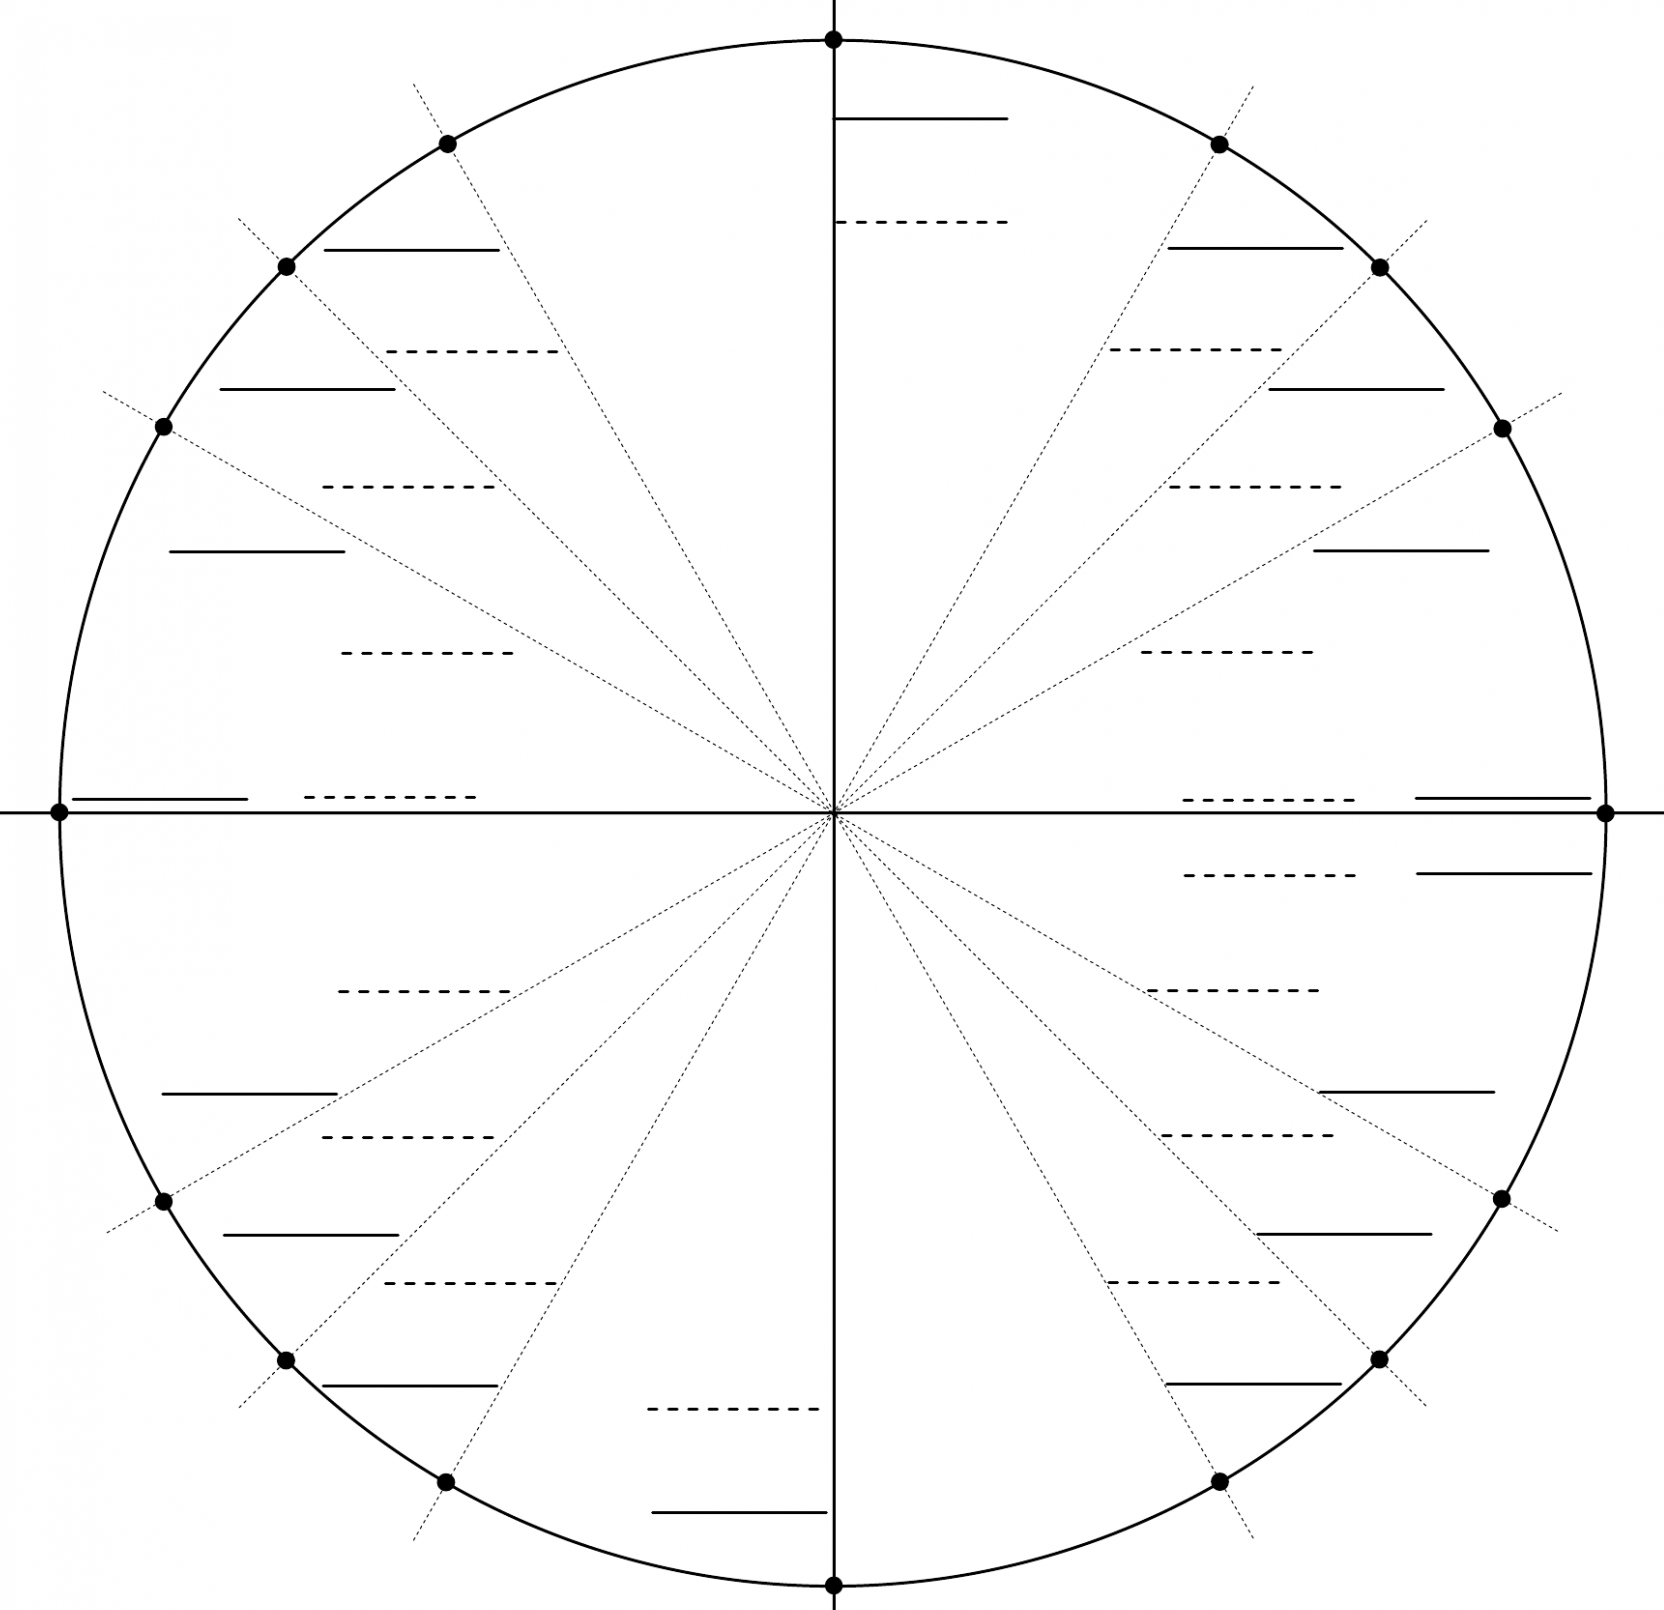 circle-template-a4-5cm-looking-for-a-5-cm-diameter-circle-template-download-this-a4-circle